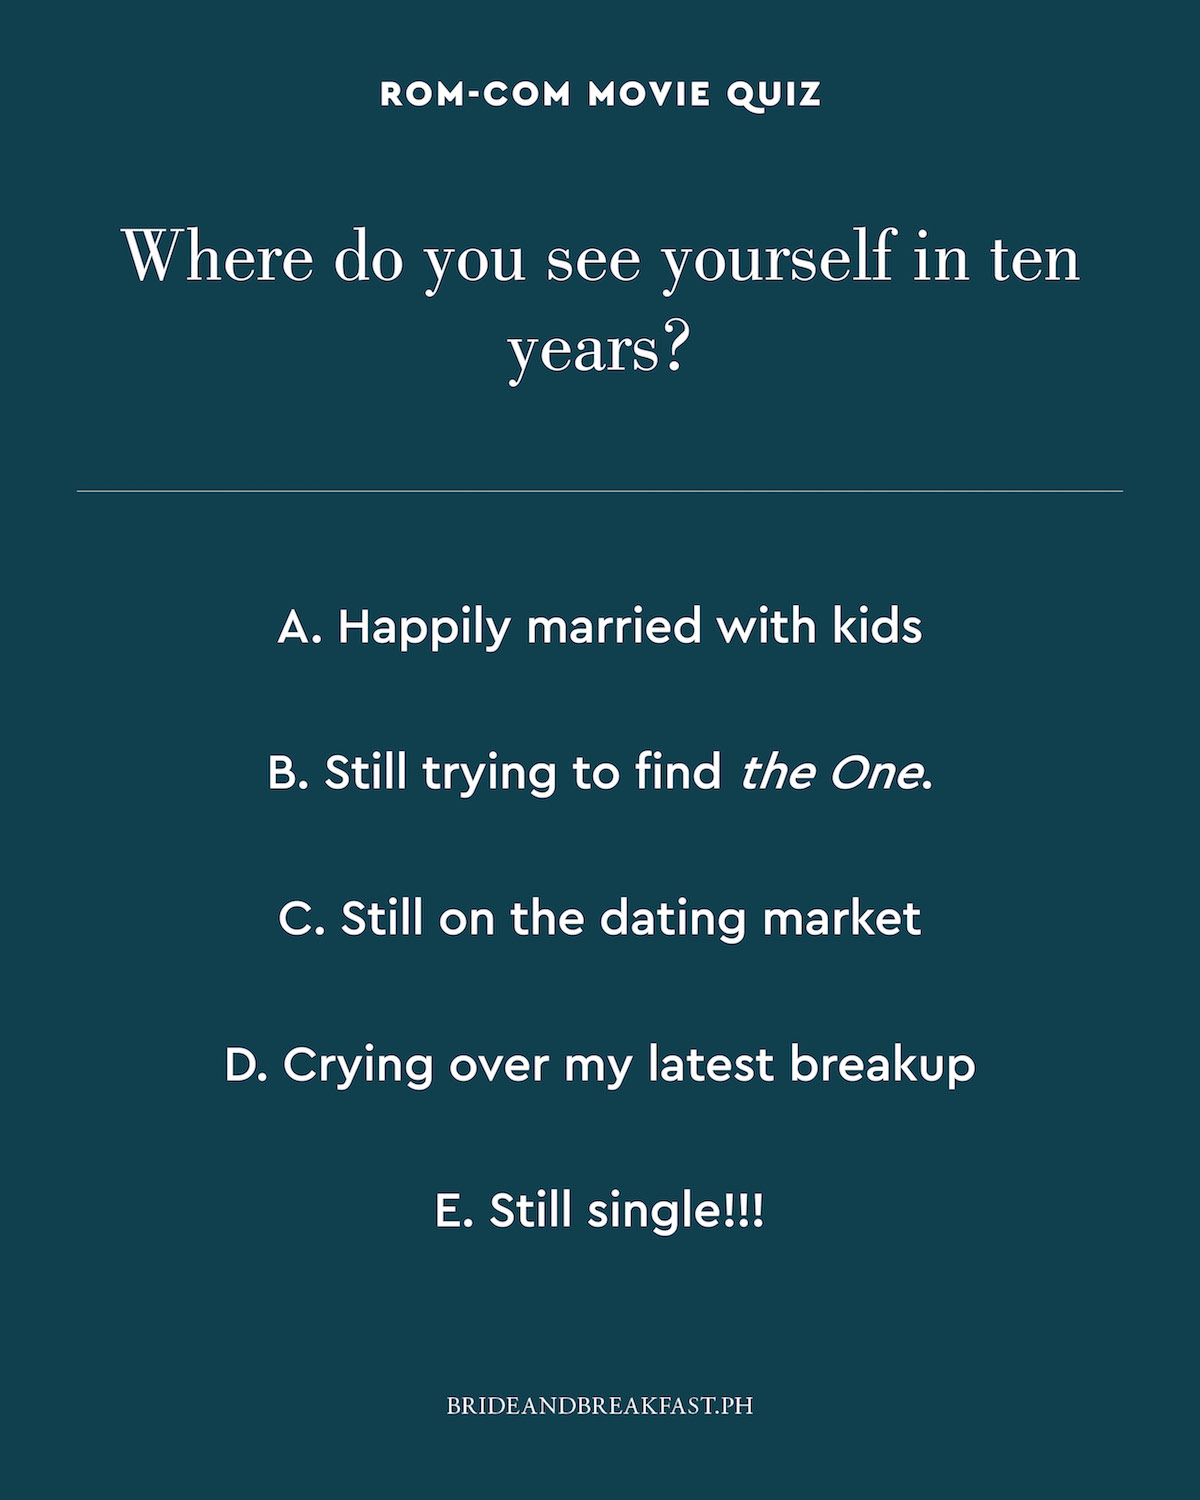 Where do you see yourself in ten years? A. Happily married with kids B. Still trying to find the One. C. Still on the dating market D. Crying over my latest breakup E. Still single!!!